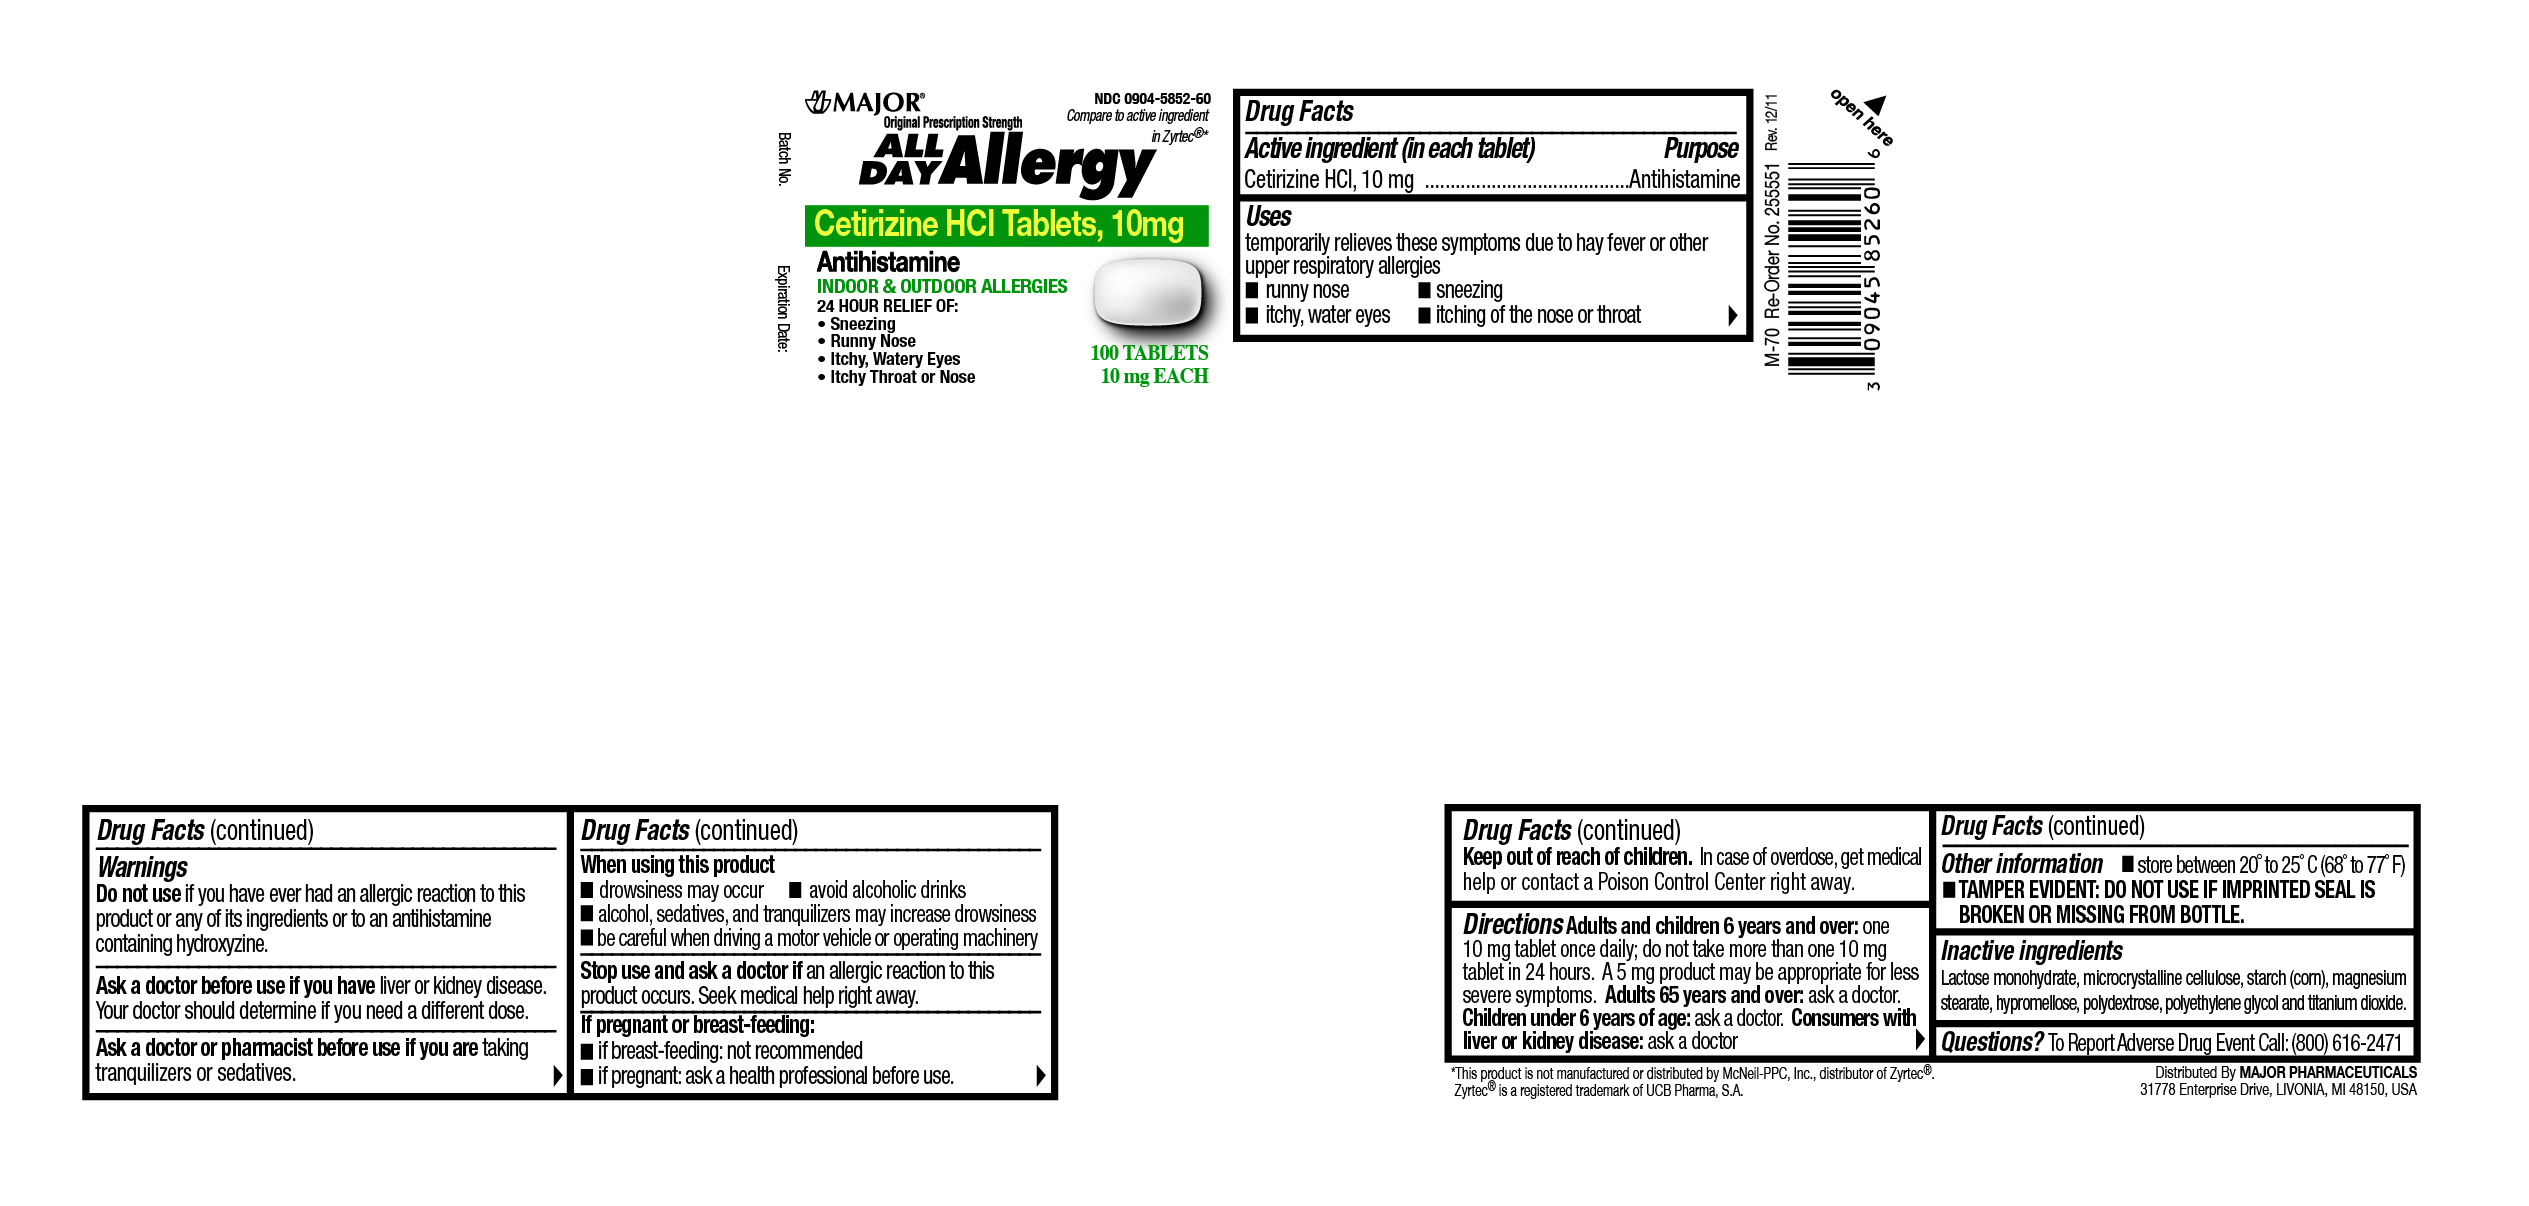 All Day Allergy 100 Ct Bottle Label